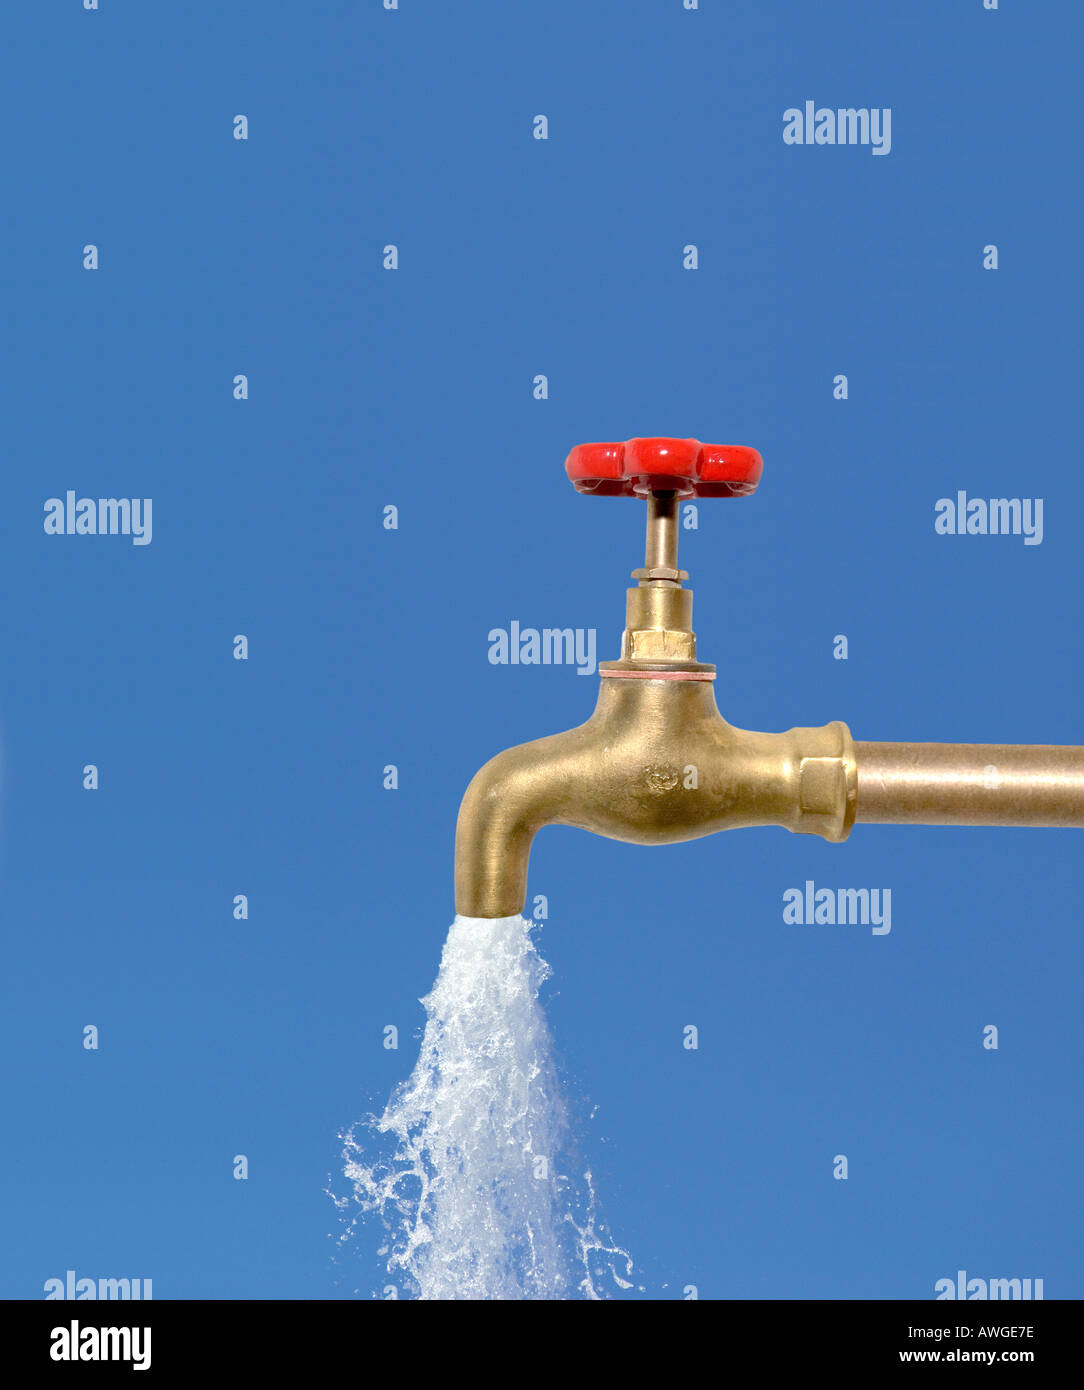 water flowing out of a tap digital composite Stock Photo